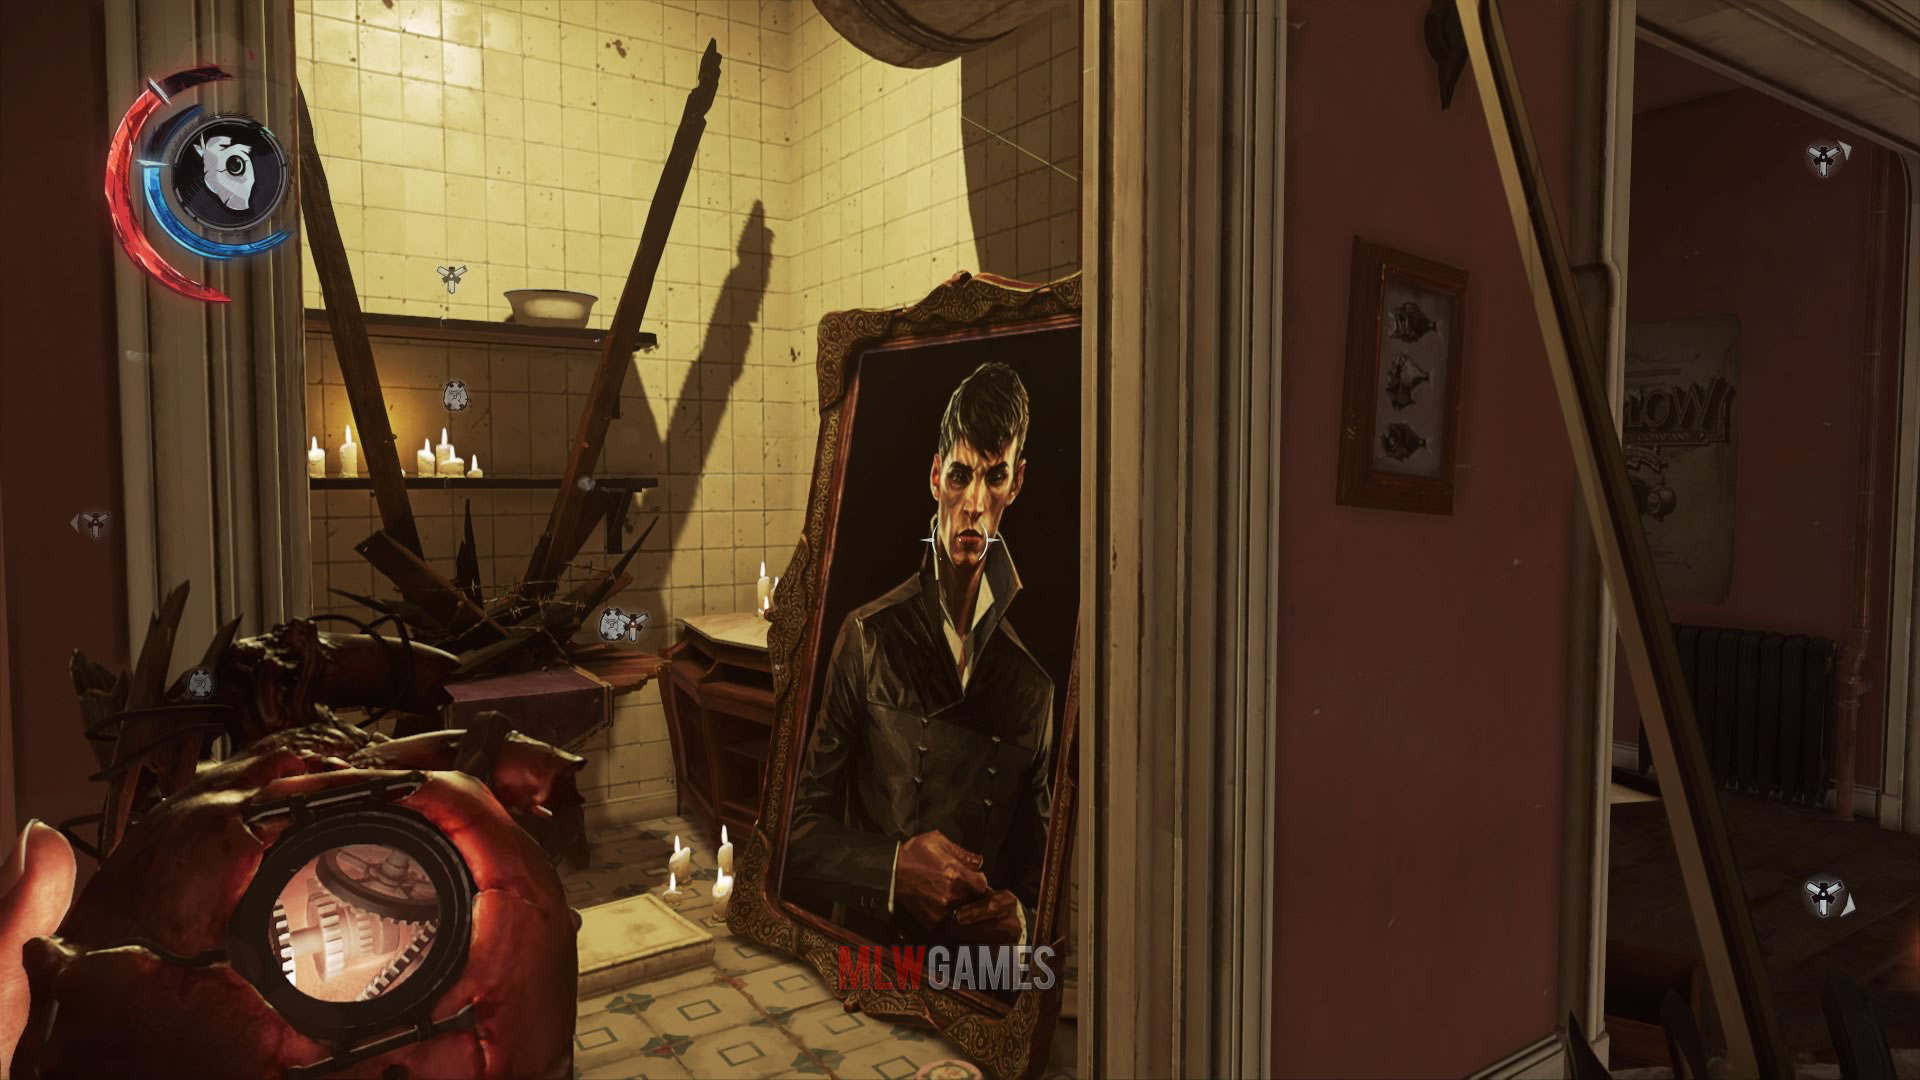 Dishonored 2's Achievement/Trophy list revealed